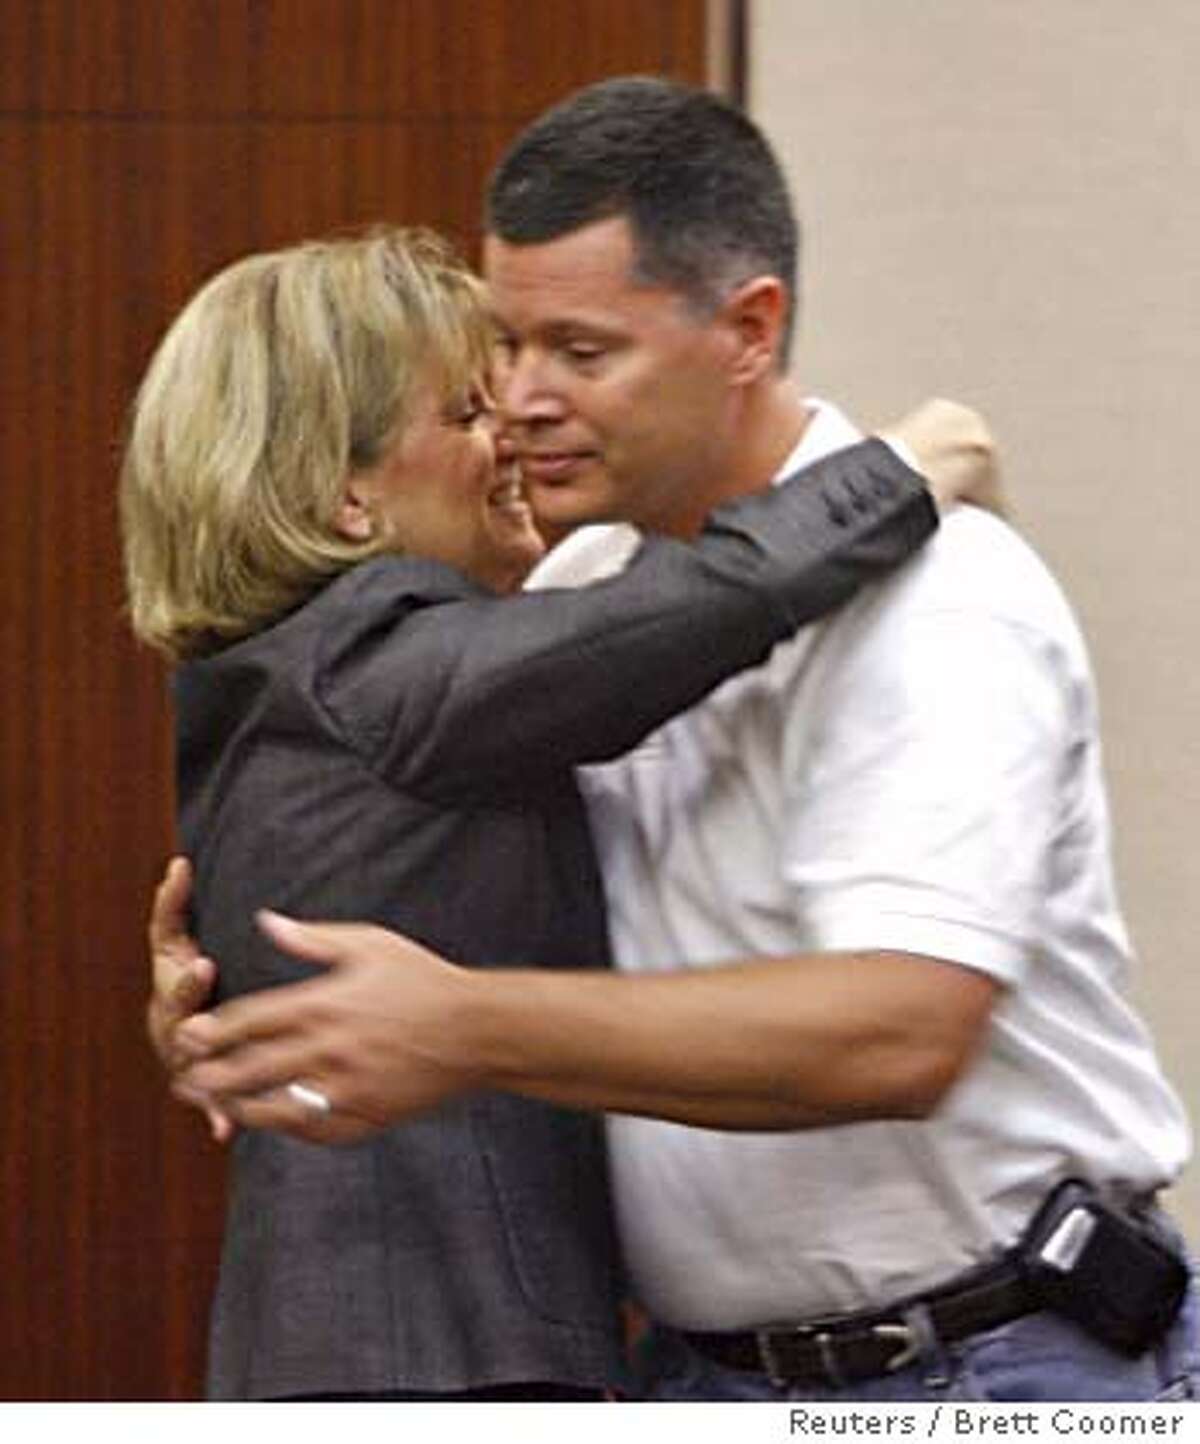 Andrea Yates' ex-husband Russell Yates is hugged by Mary Parnham after the verdict in Andrea Yates murder retrial was read in Houston July 26, 2006. A jury on Wednesday found Andrea Yates not guilty by reason of insanity in the drownings of her five children, ages 6 months to 7 years, in the bathtub of their Houston home five years ago. REUTERS/Brett Coomer / Houston Chronicle/Pool (UNITED STATES)